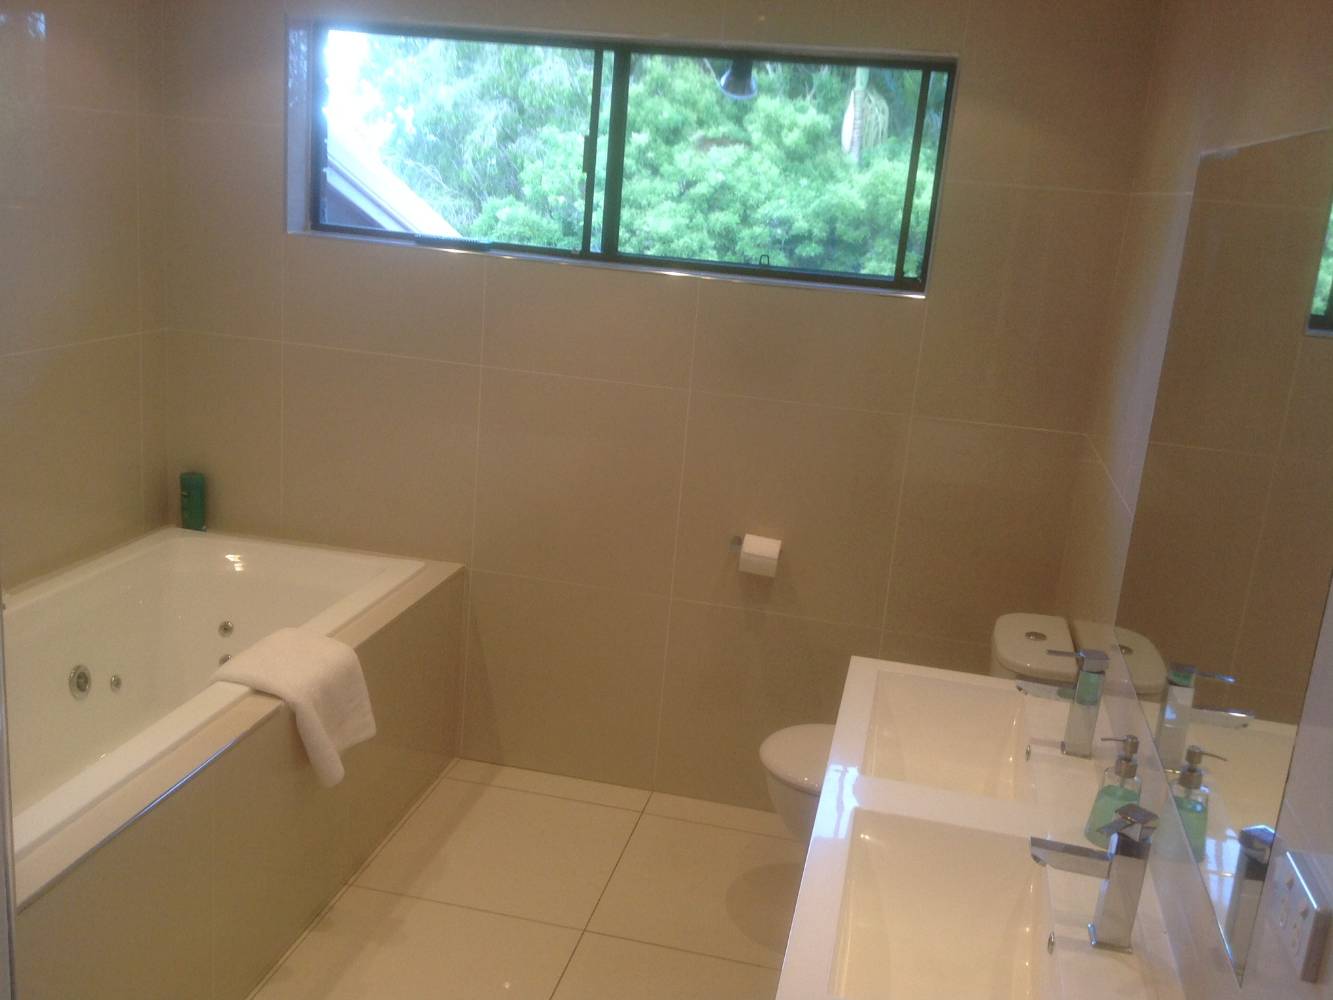 Main bathroom with spa bath and separate shower